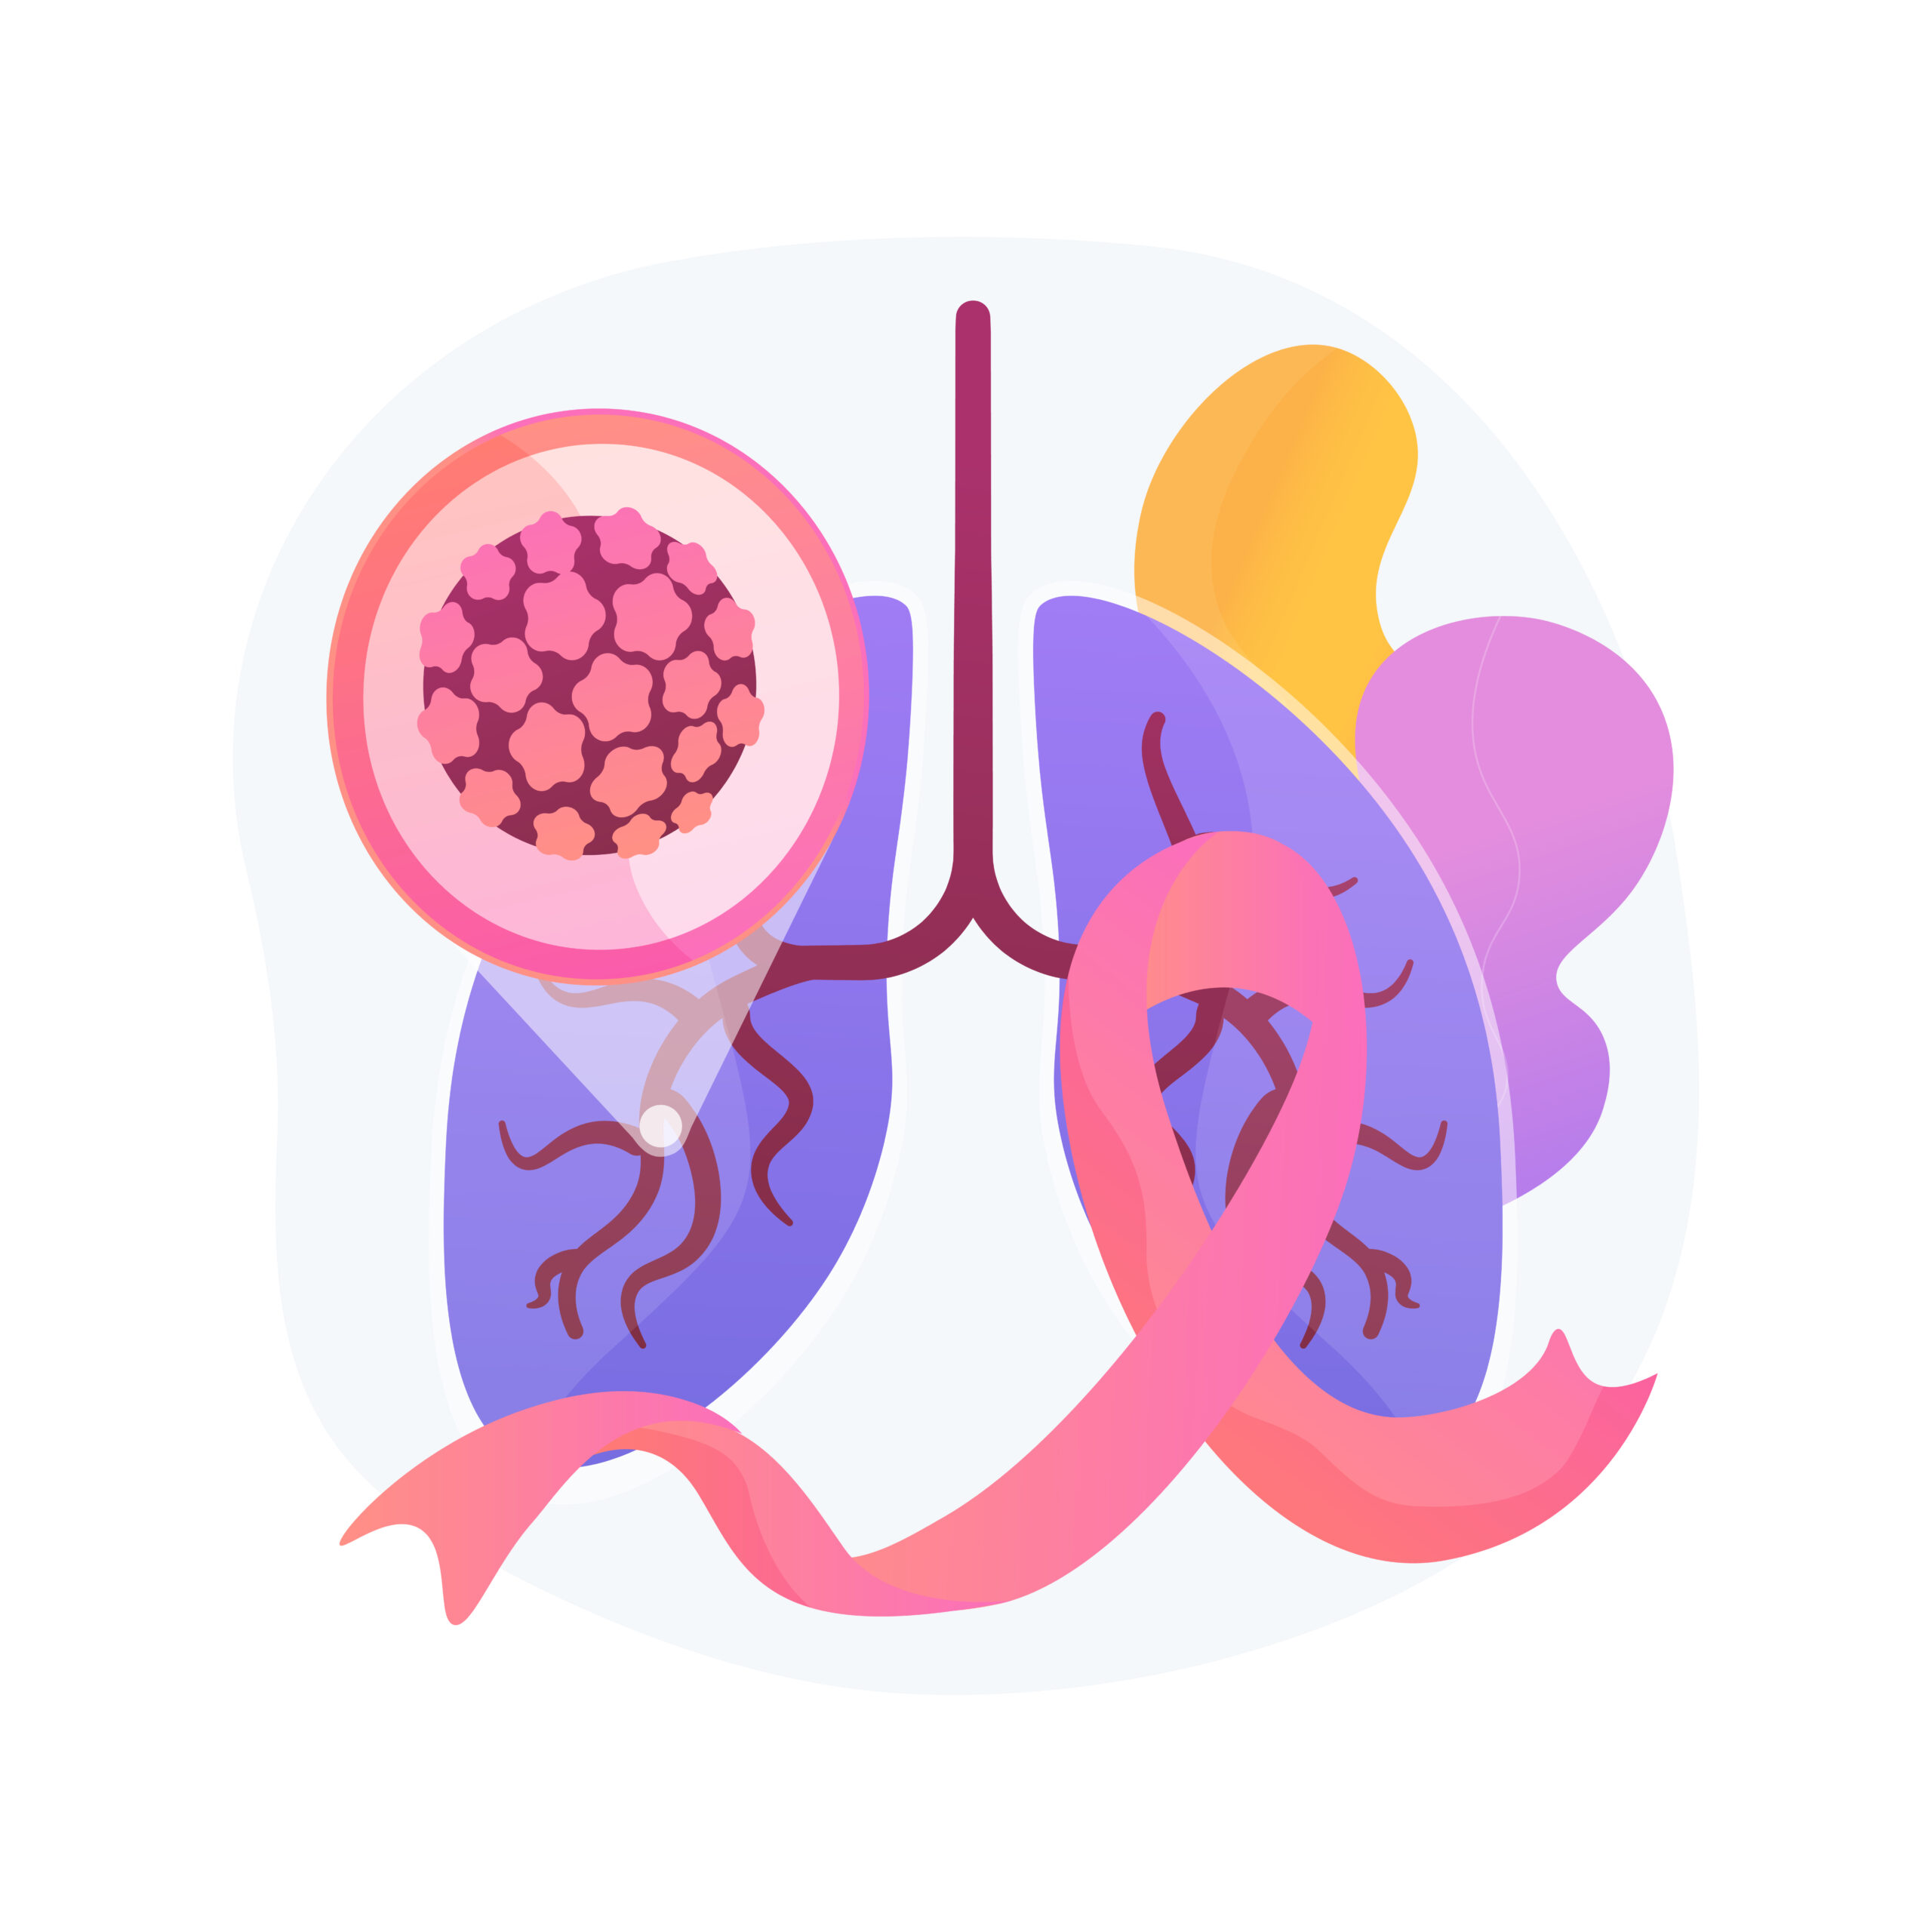 Lung cancer abstract concept vector illustration. Oncology early stage diagnostics, tumor risk factor, lung cancer treatment, fighting disease, chemical therapy, oncology abstract metaphor.